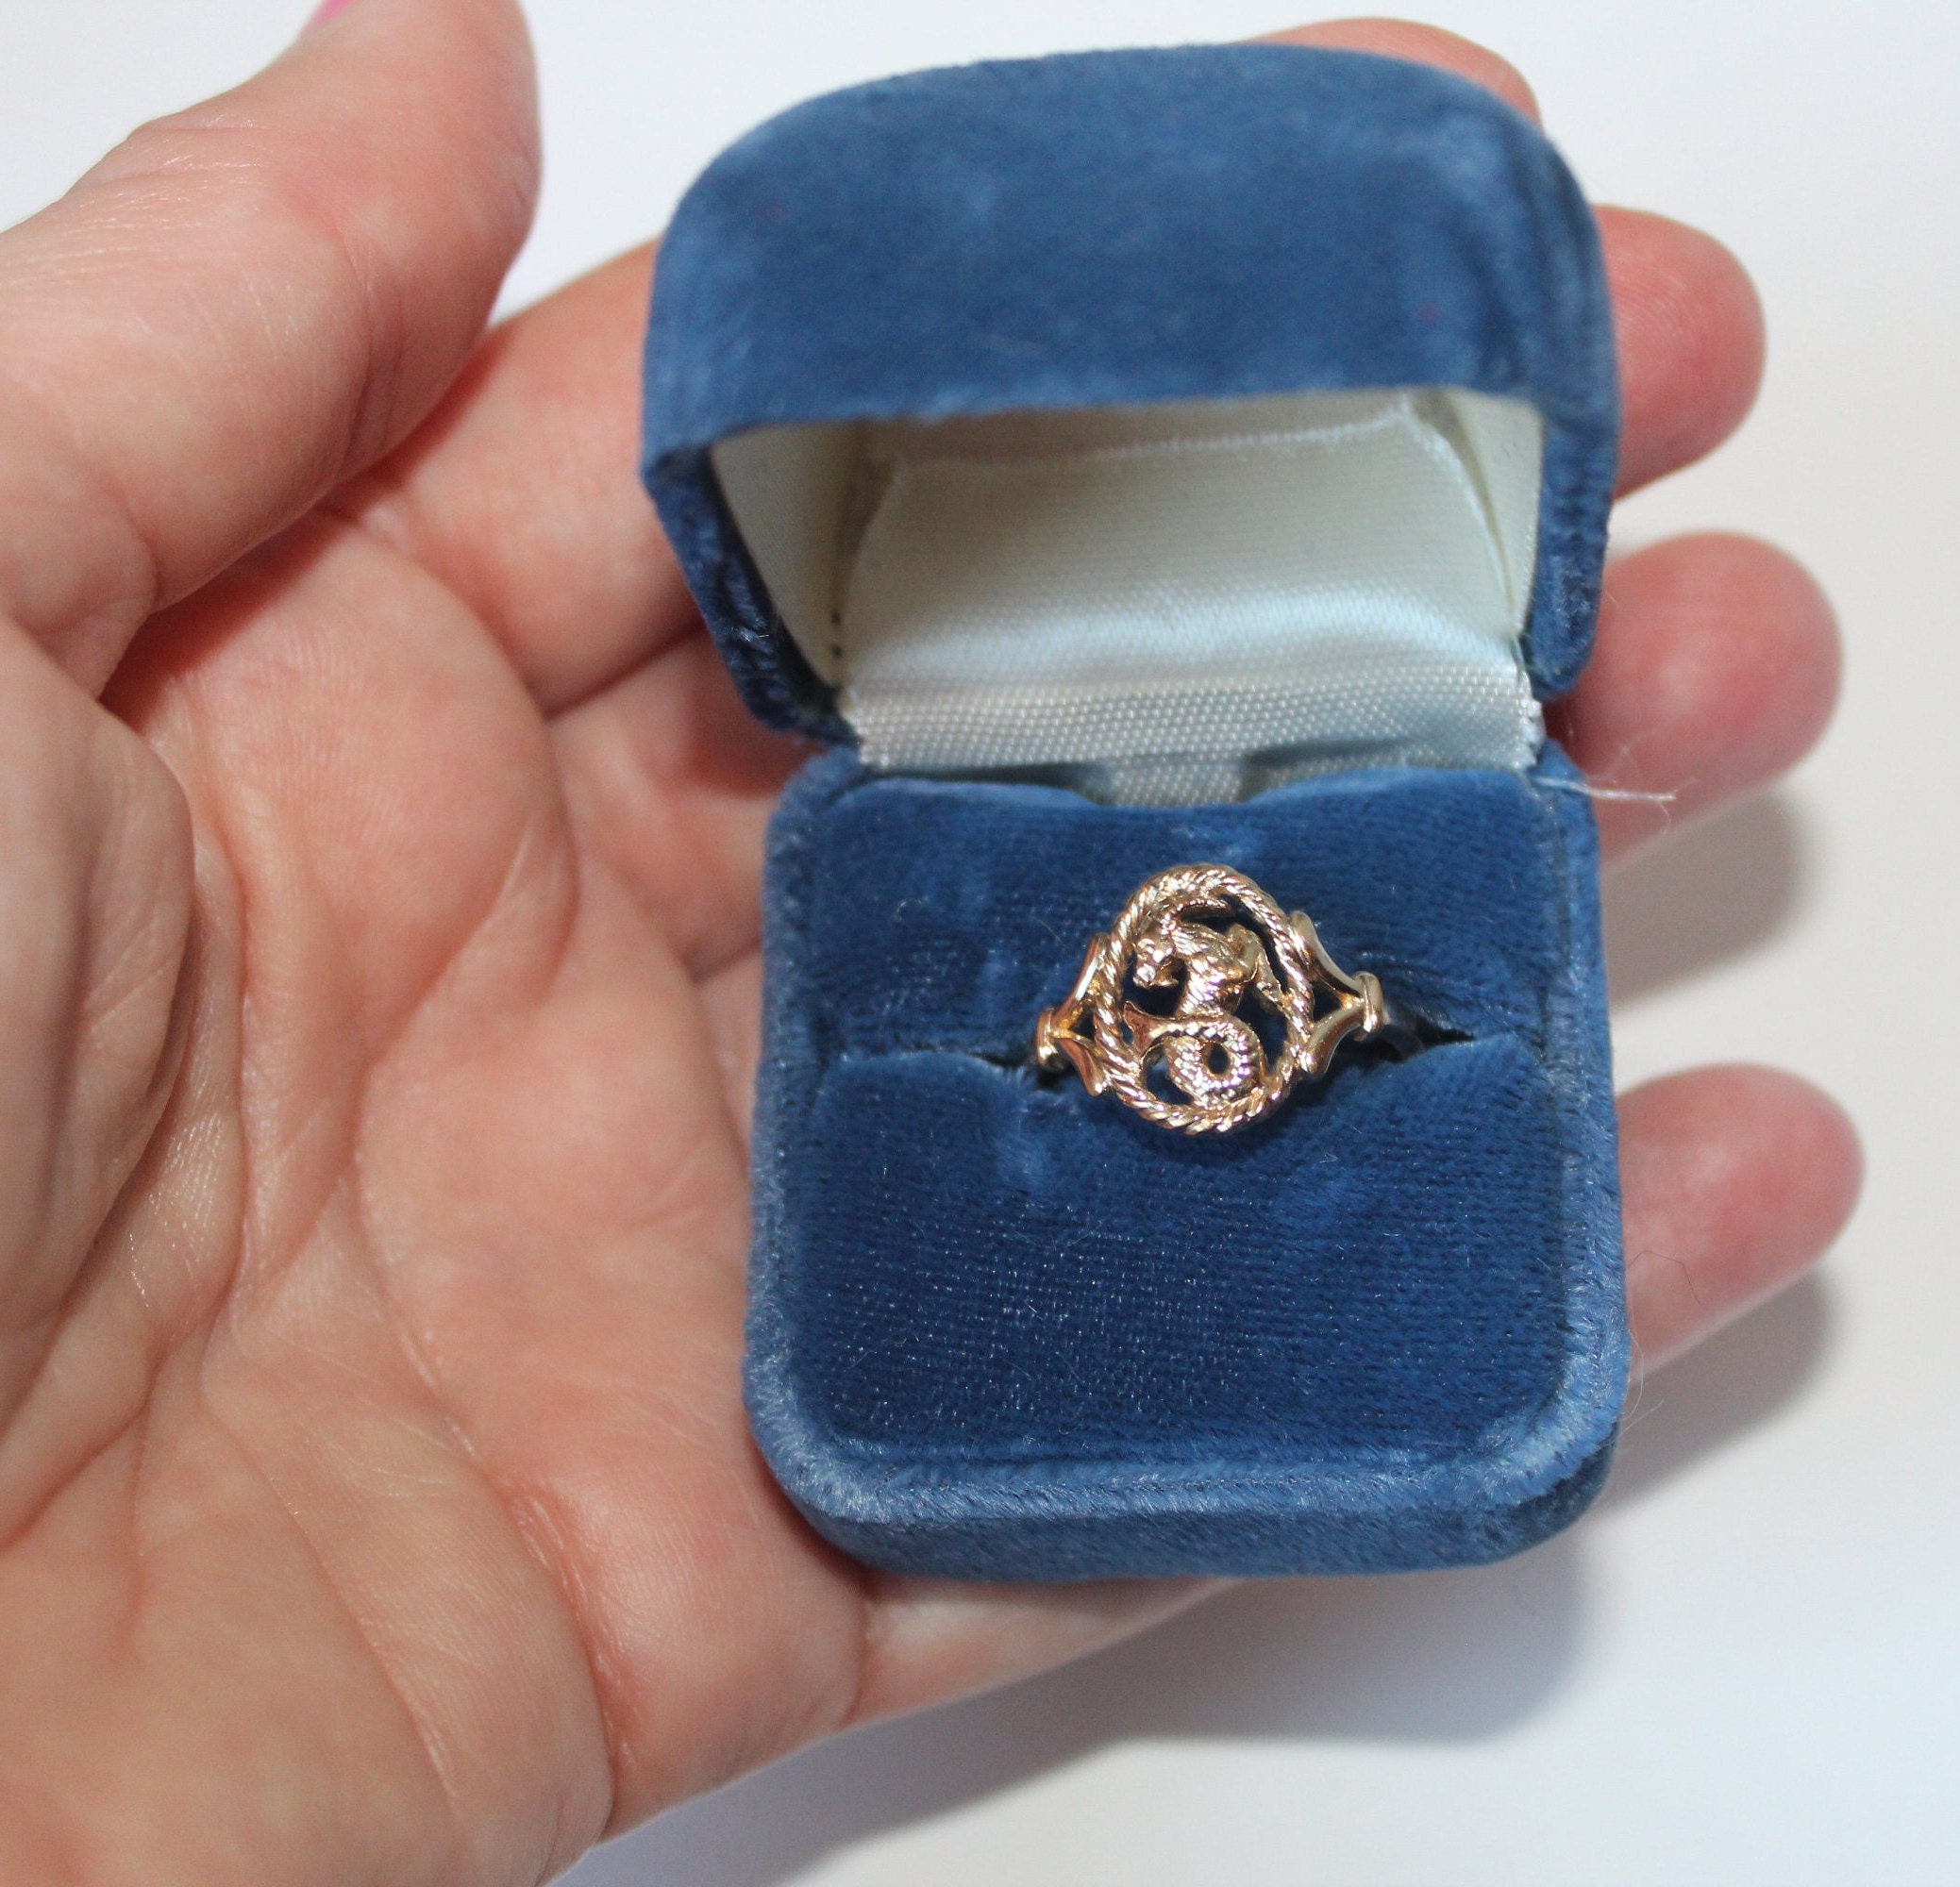 Vintage Size 8 Gold Tone Zodiac Astrology Aries Ram Ring By Avon in Box, Specialty Limited Edition Blue Velvet Box